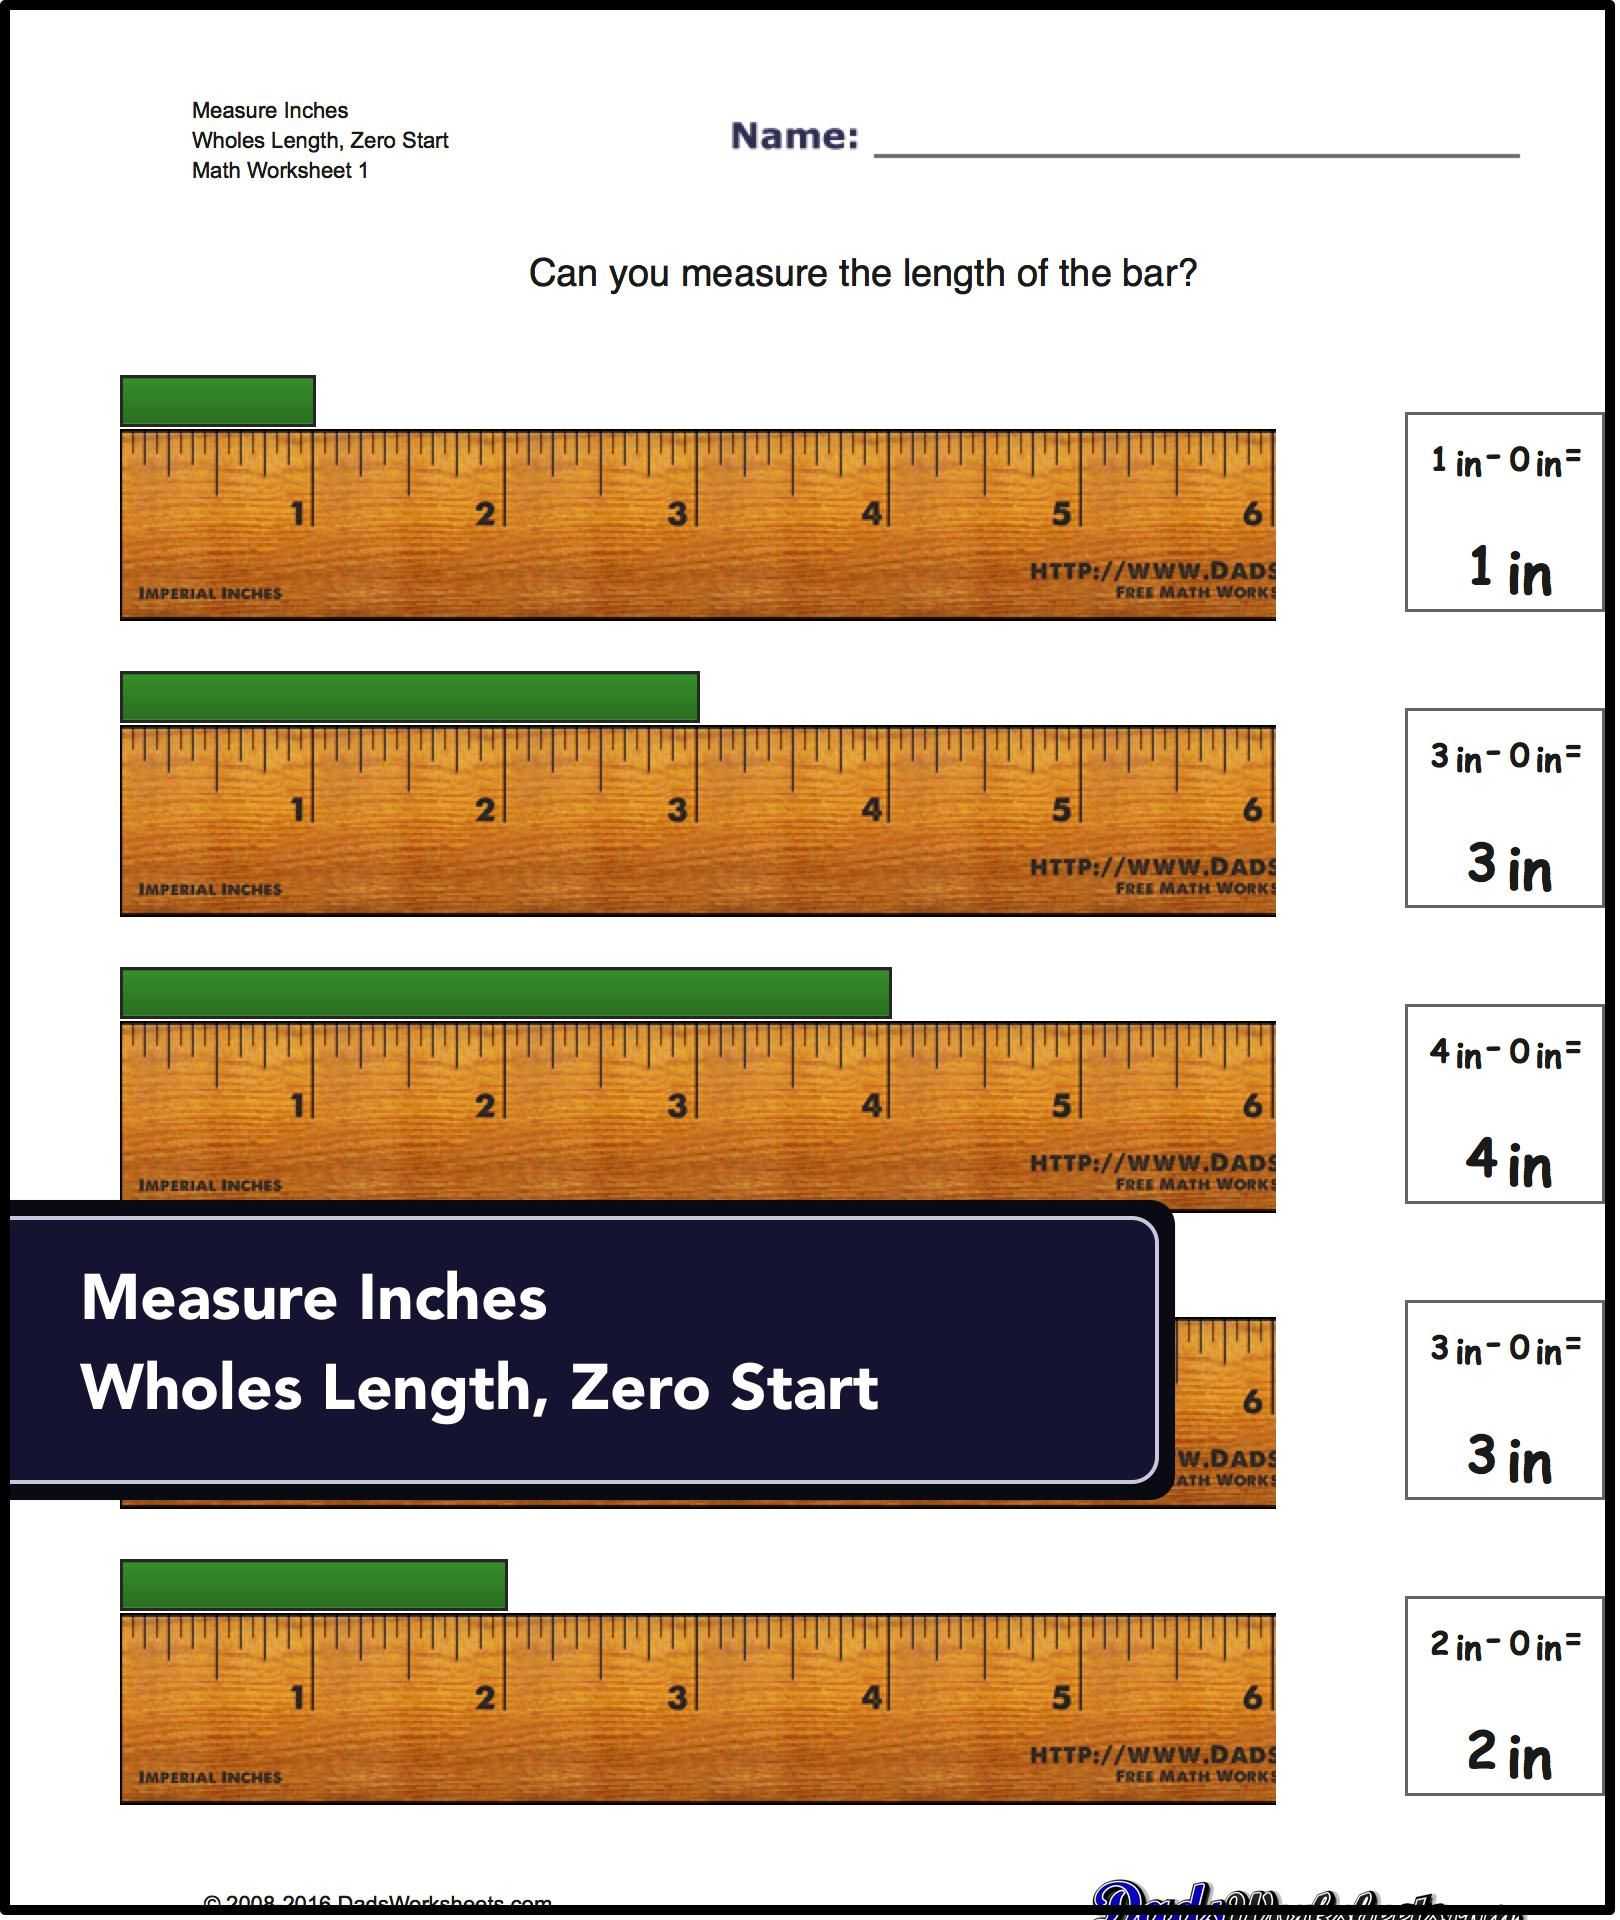 Standard Notation Worksheet Along with these are What You Re Working Up to Worksheets for Measuring Length